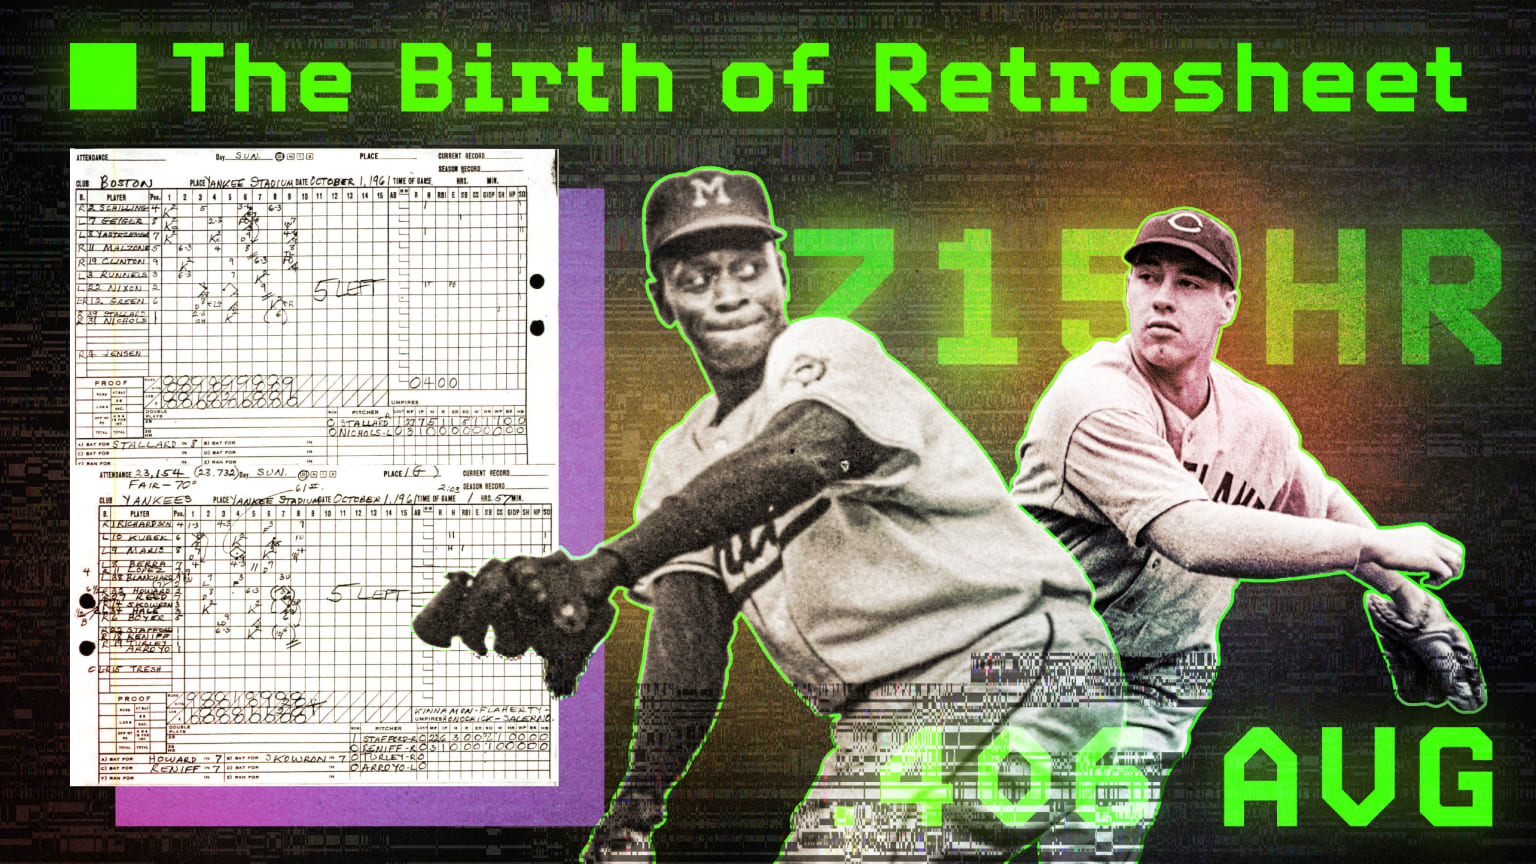 A photo illustration shows two pitchers and a scorebook with the words ''The Birth of Retrosheet'' and baseball statistics